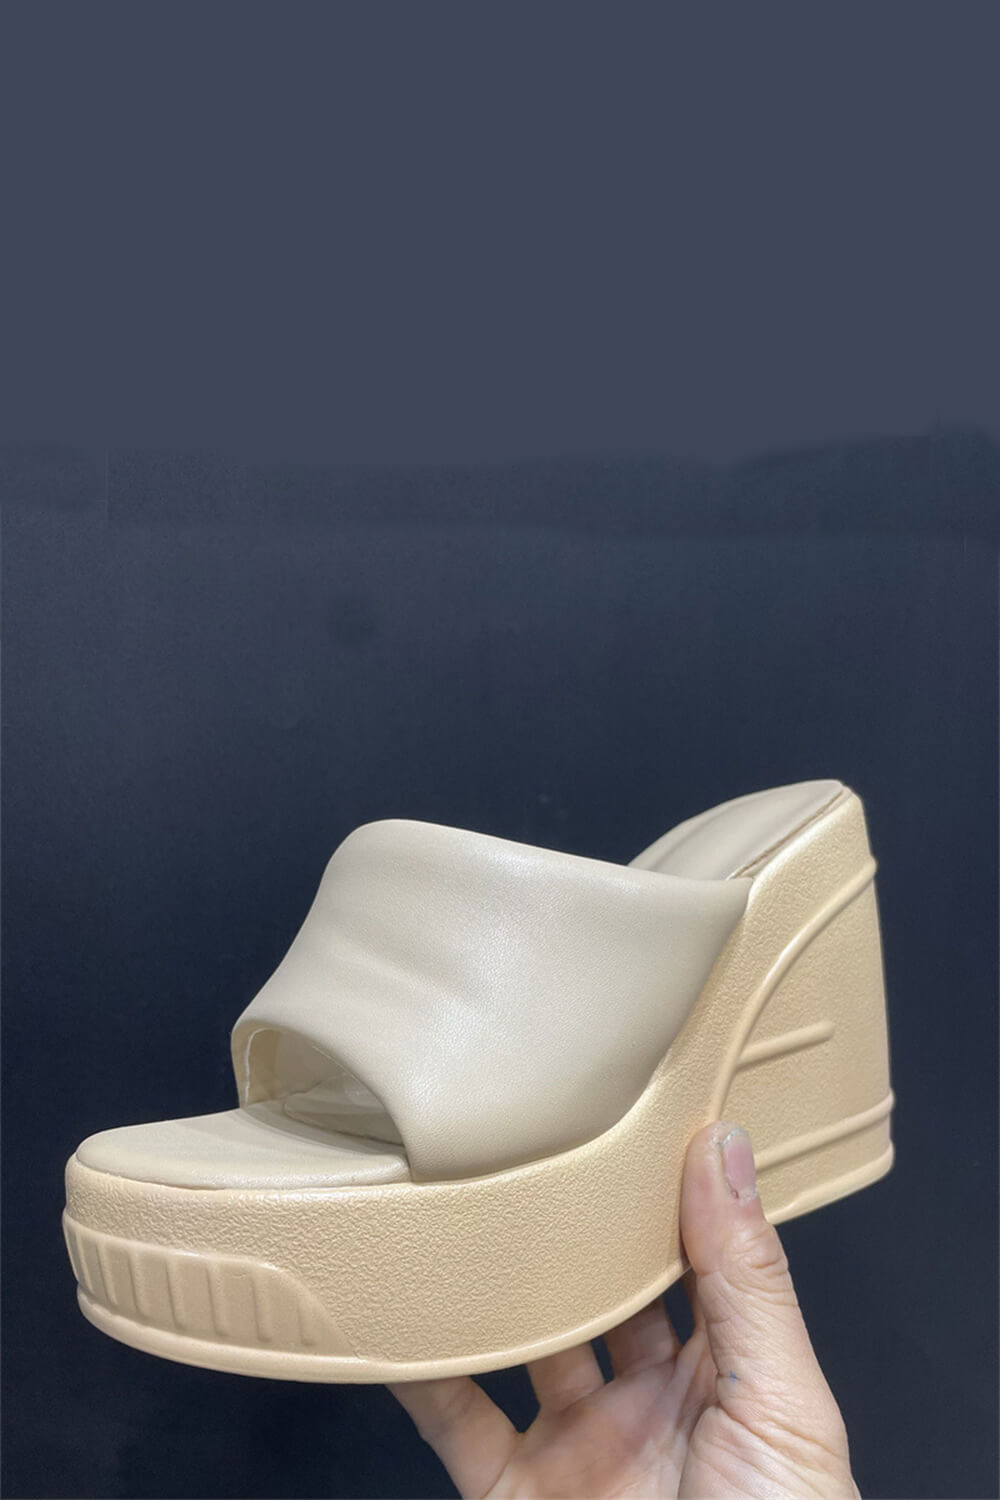 Padded Faux Leather Open Toe Wedge Heeled Mule Sandals - Cream